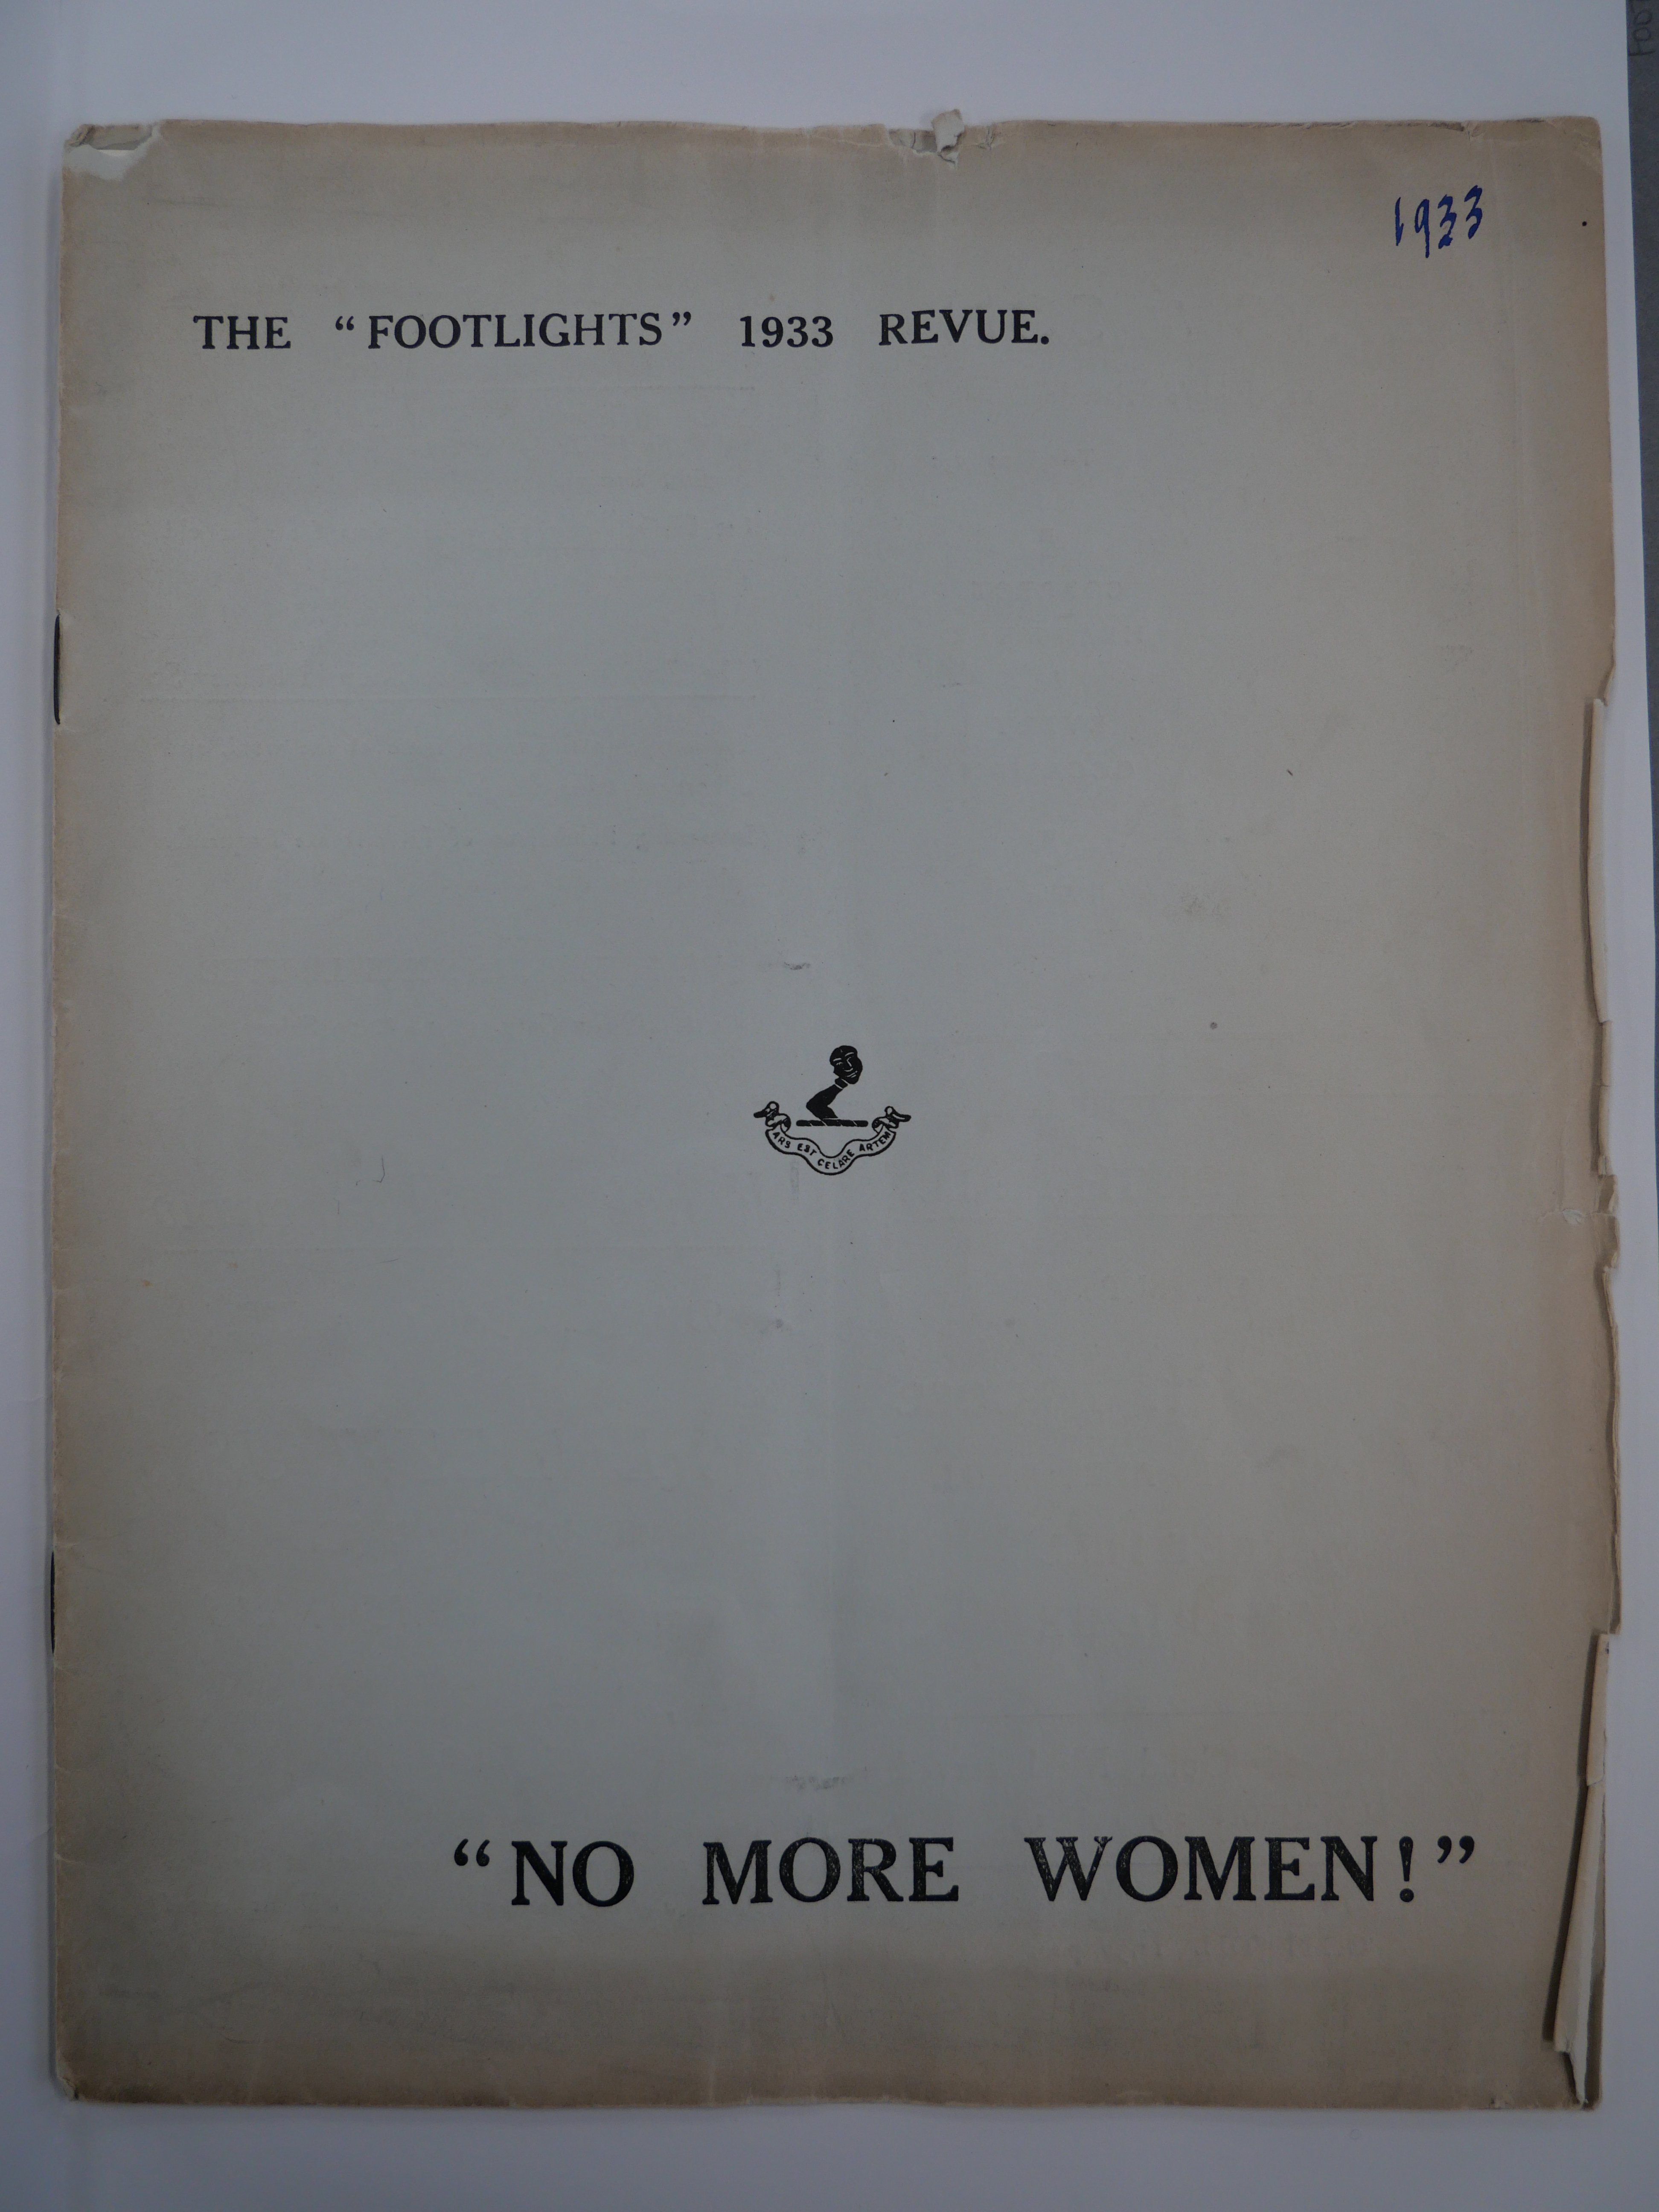 Cambridge Footlights, the world-famous comedy society, staged a production in 1933 called No More Women. It had an all-male cast and was a backlash to the inclusion of women the year before. (Cambridge University/ PA)